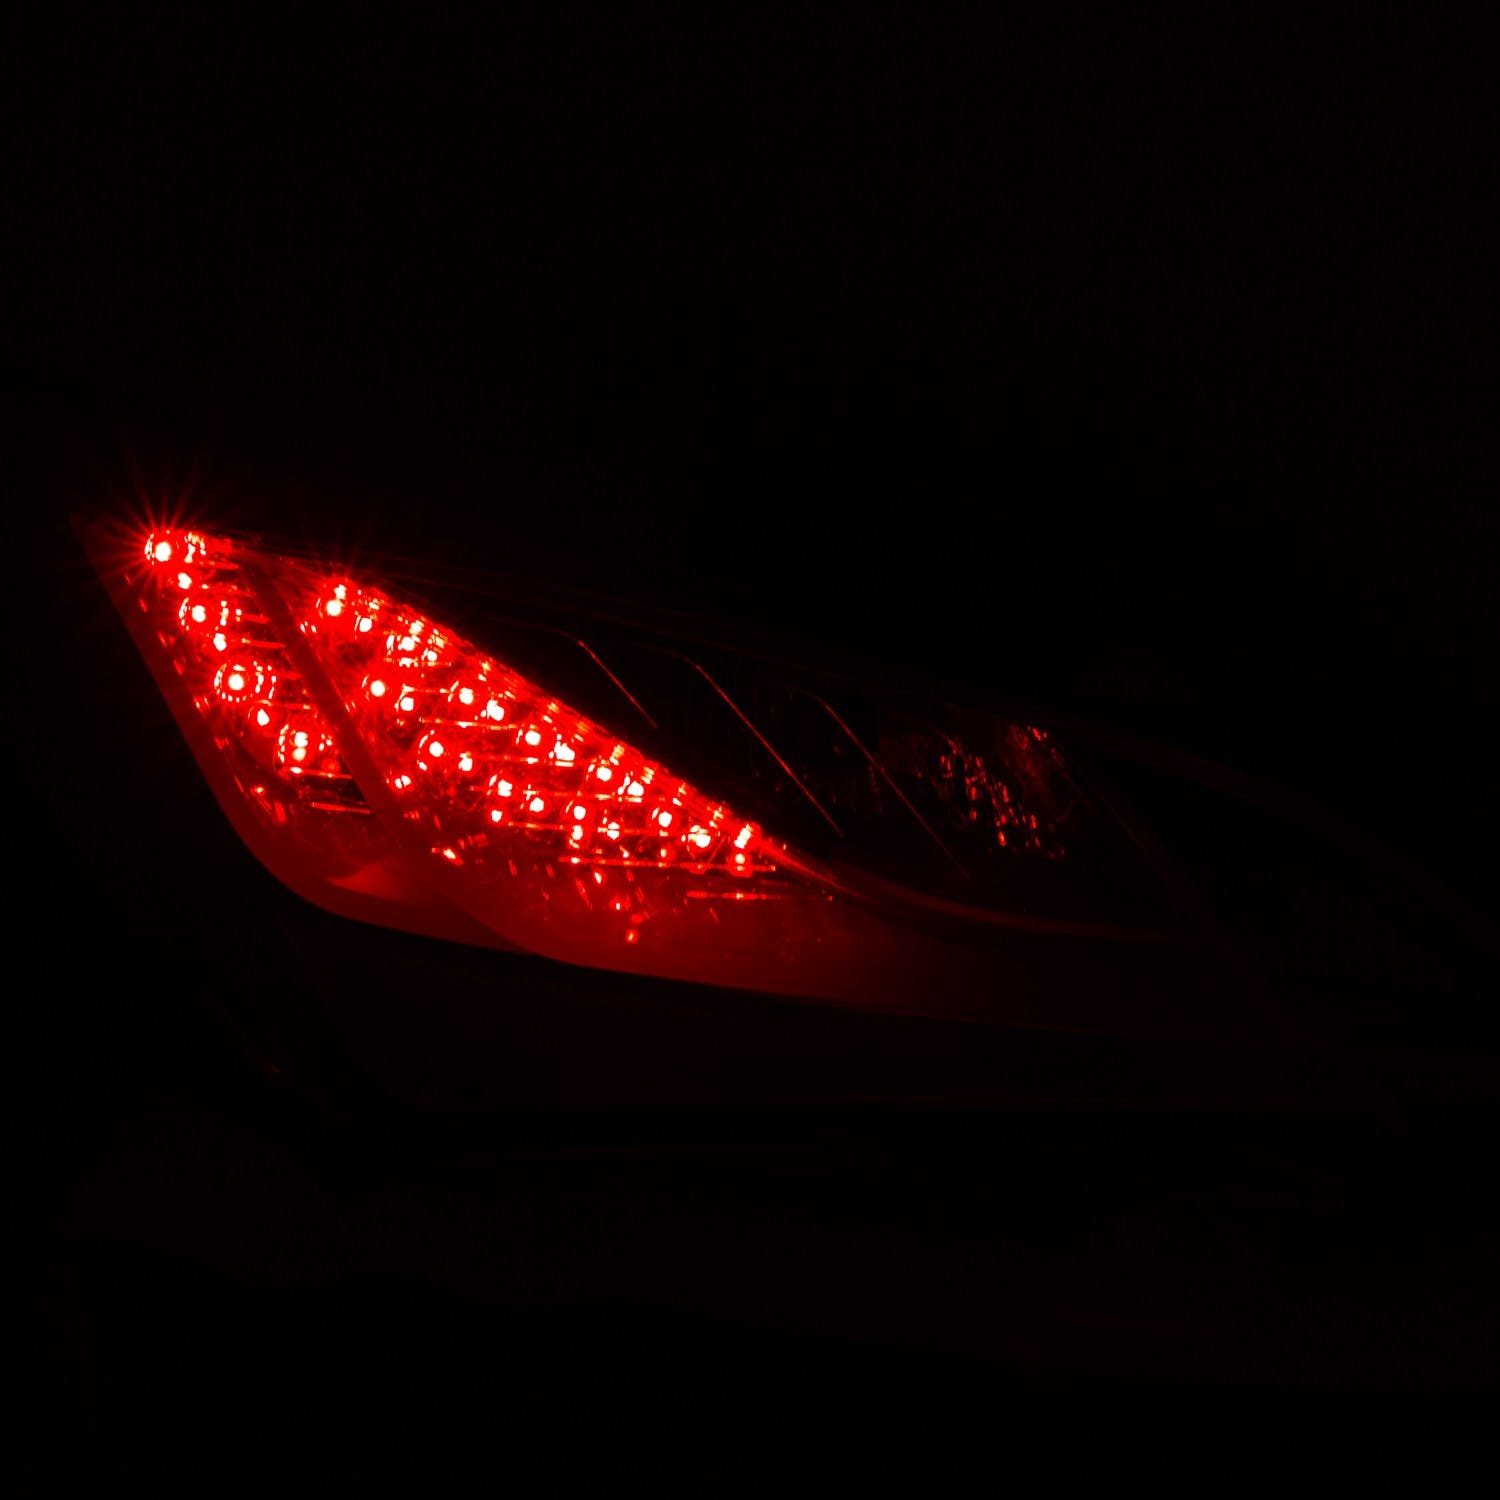 AnzoUSA 321334 LED Taillights Red/Clear